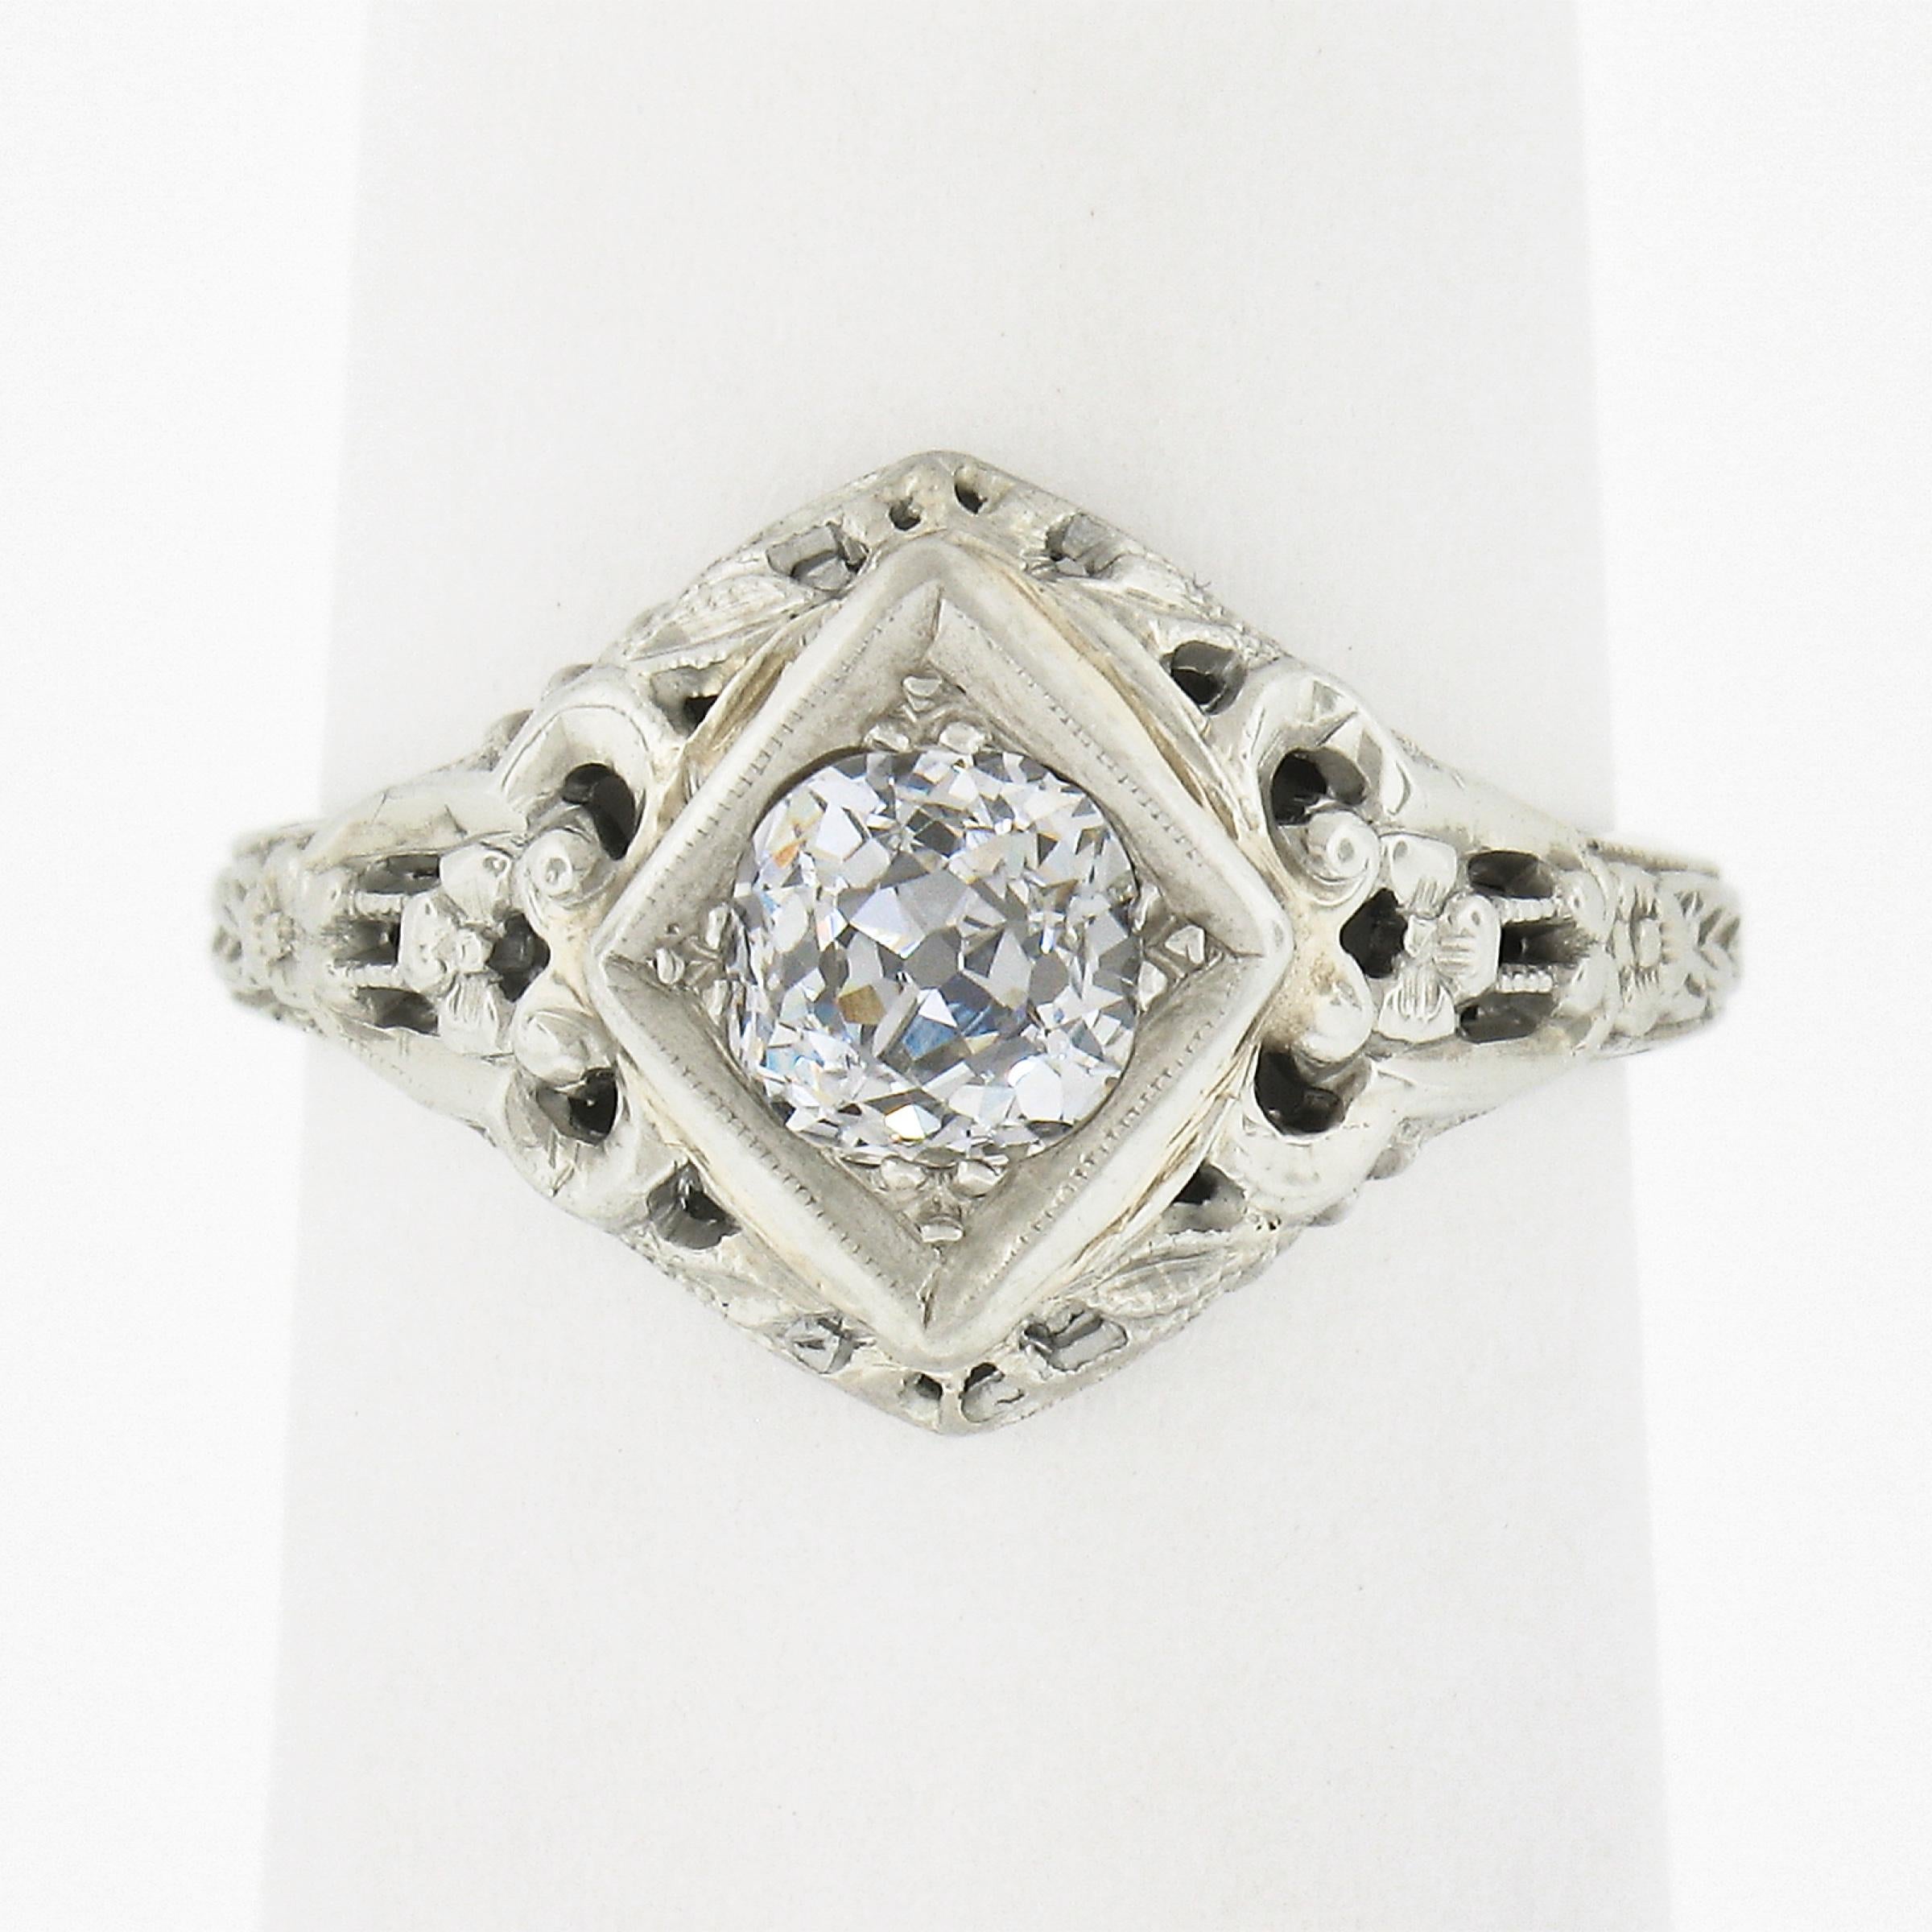 This stunning art deco engagement ring is crafted in solid 18k white gold and features an approximately 0.60 carat diamond solitaire bead set in a rhombus shaped setting at the center of the slightly puffed design. This gorgeous chunky diamond is